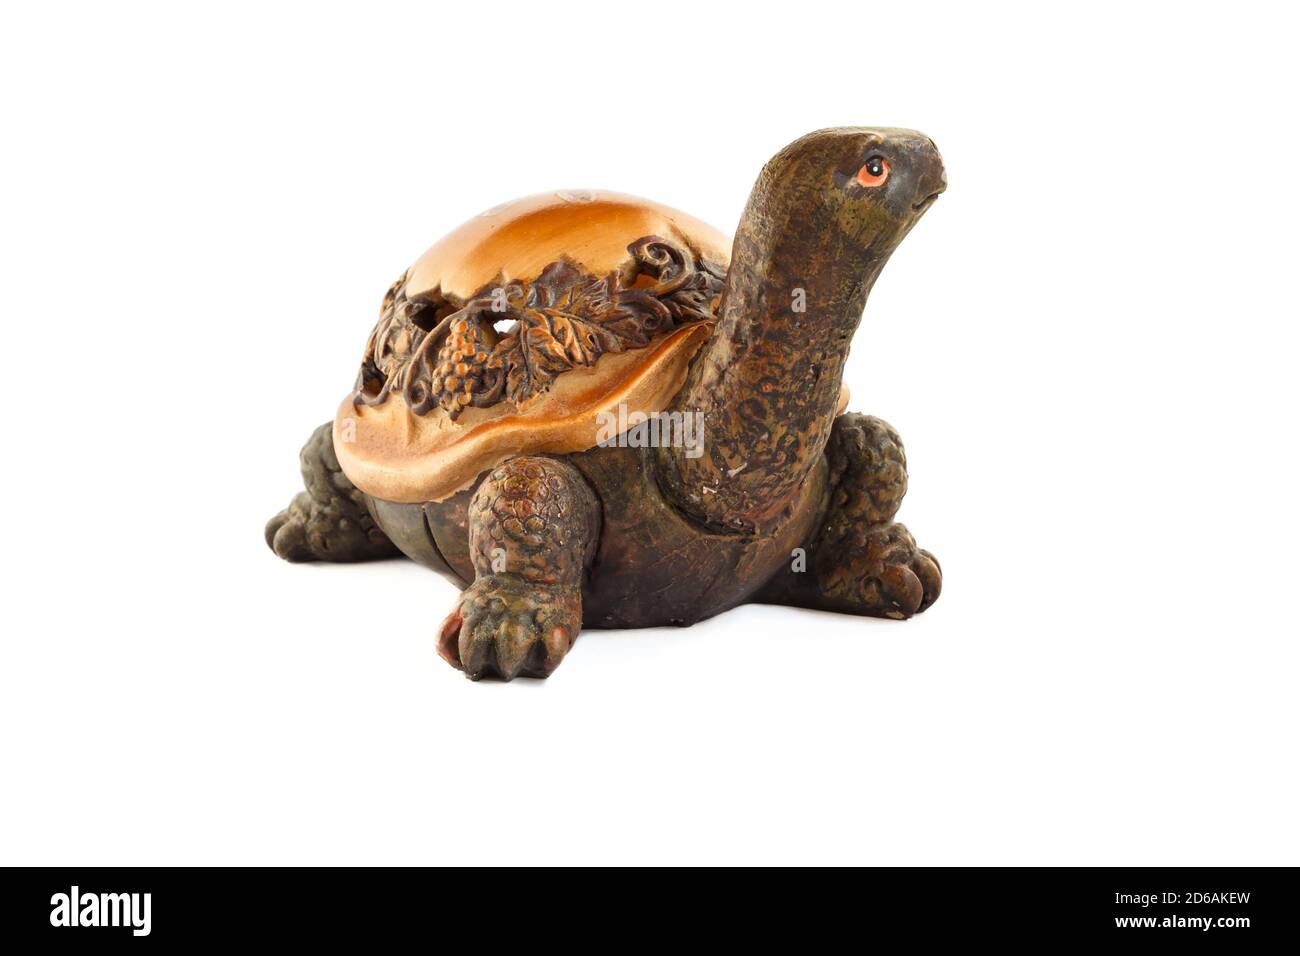 Wooden turtle figurine isolated on white background. Figurine of a turtle carved from wood. Stock Photo